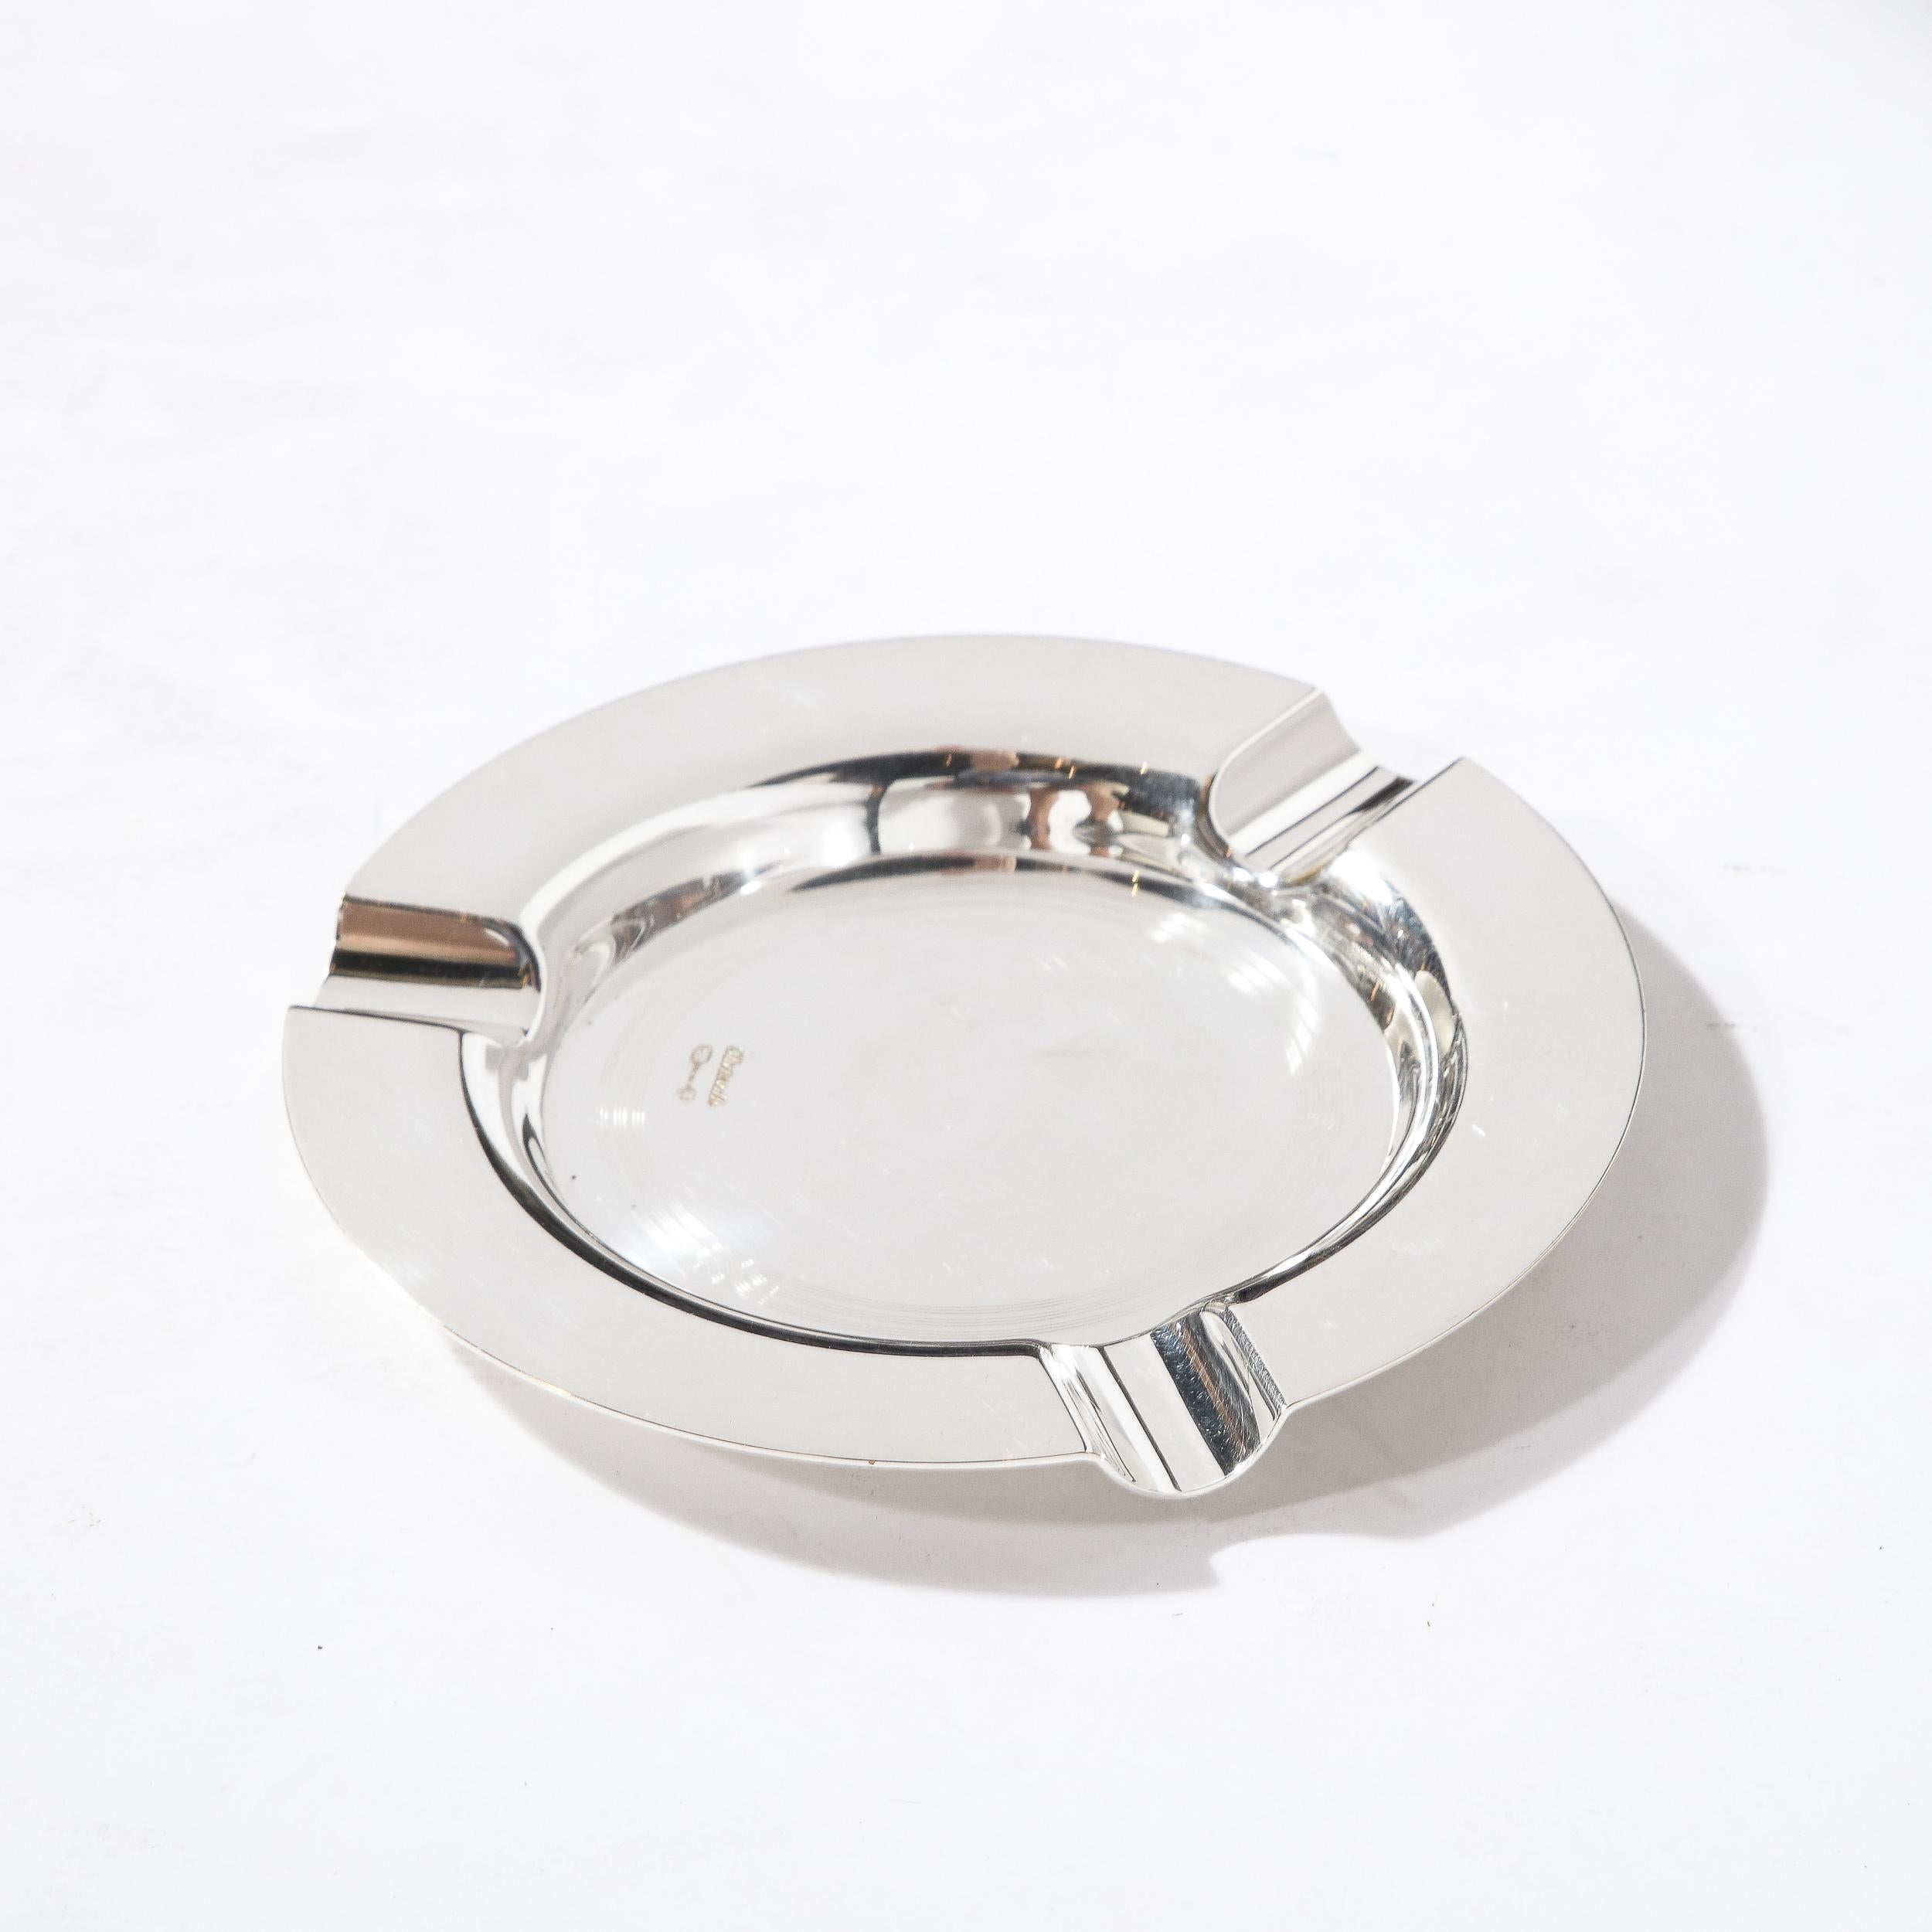 Silver Plate Christofle Silver-Plated Art Deco Style Ashtray With Engine Turned Engraving For Sale